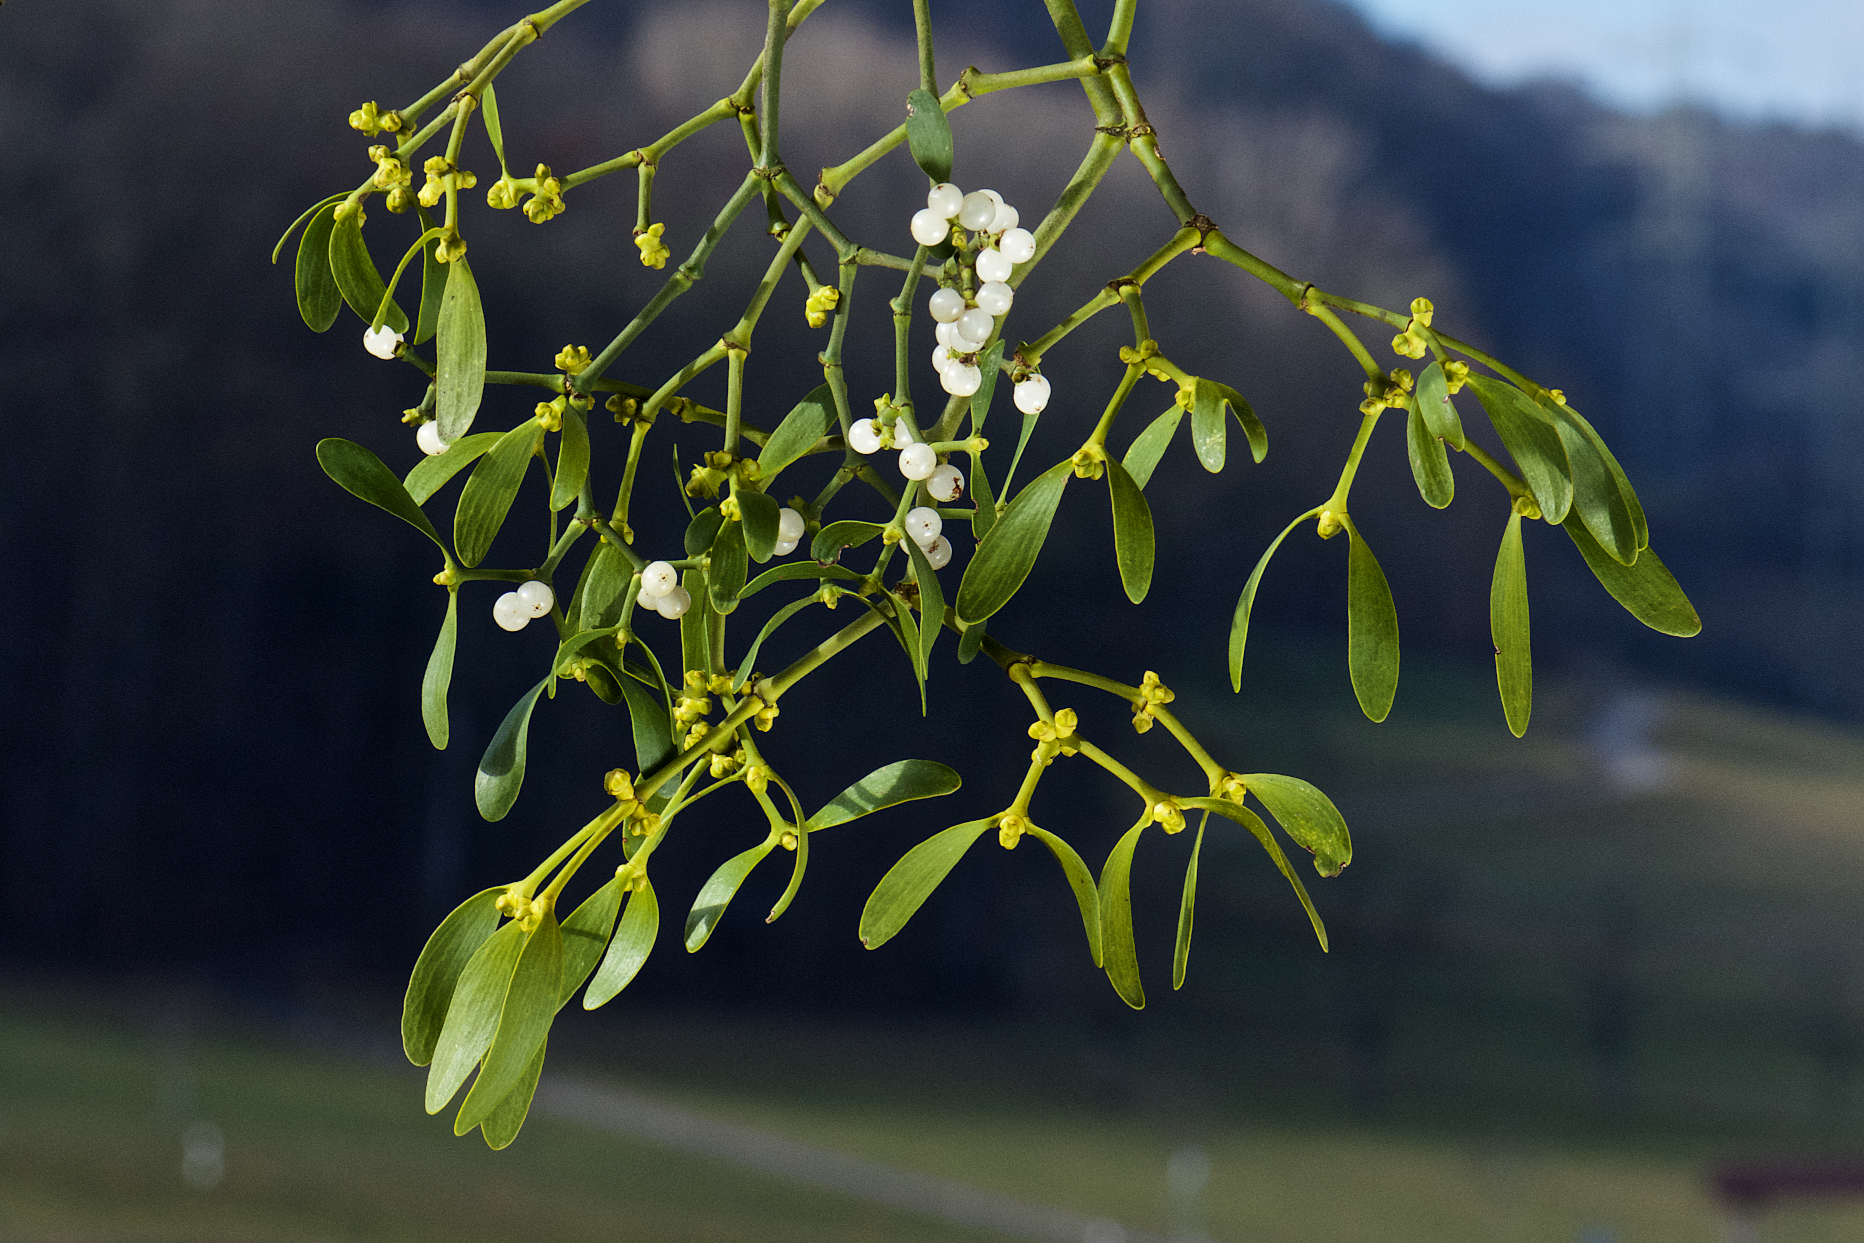 How mistletoe is both a parasitic plant and a holiday tradition